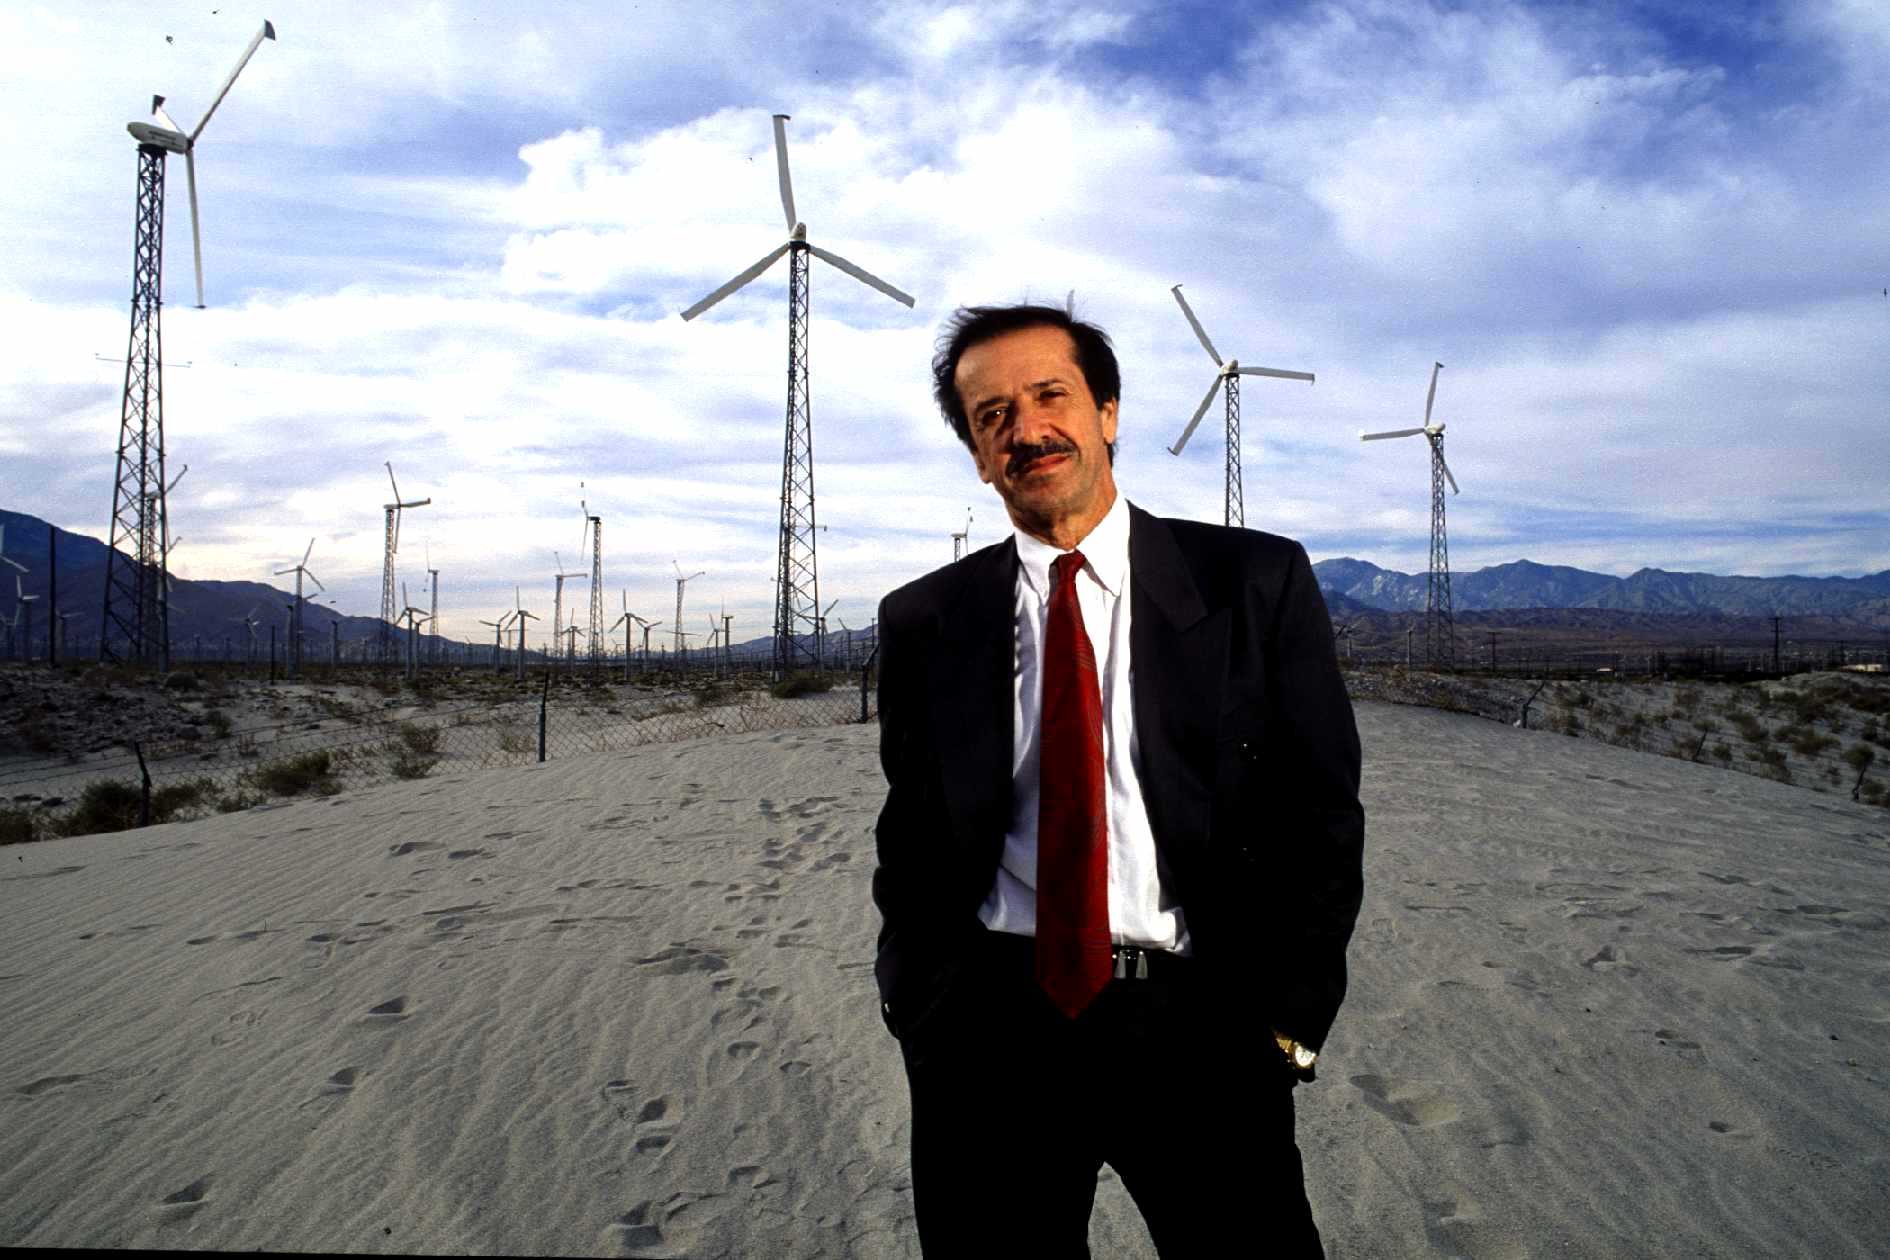 Sonny Bono poses near with Wind Farm fields in 1991 | Photo: Getty Images